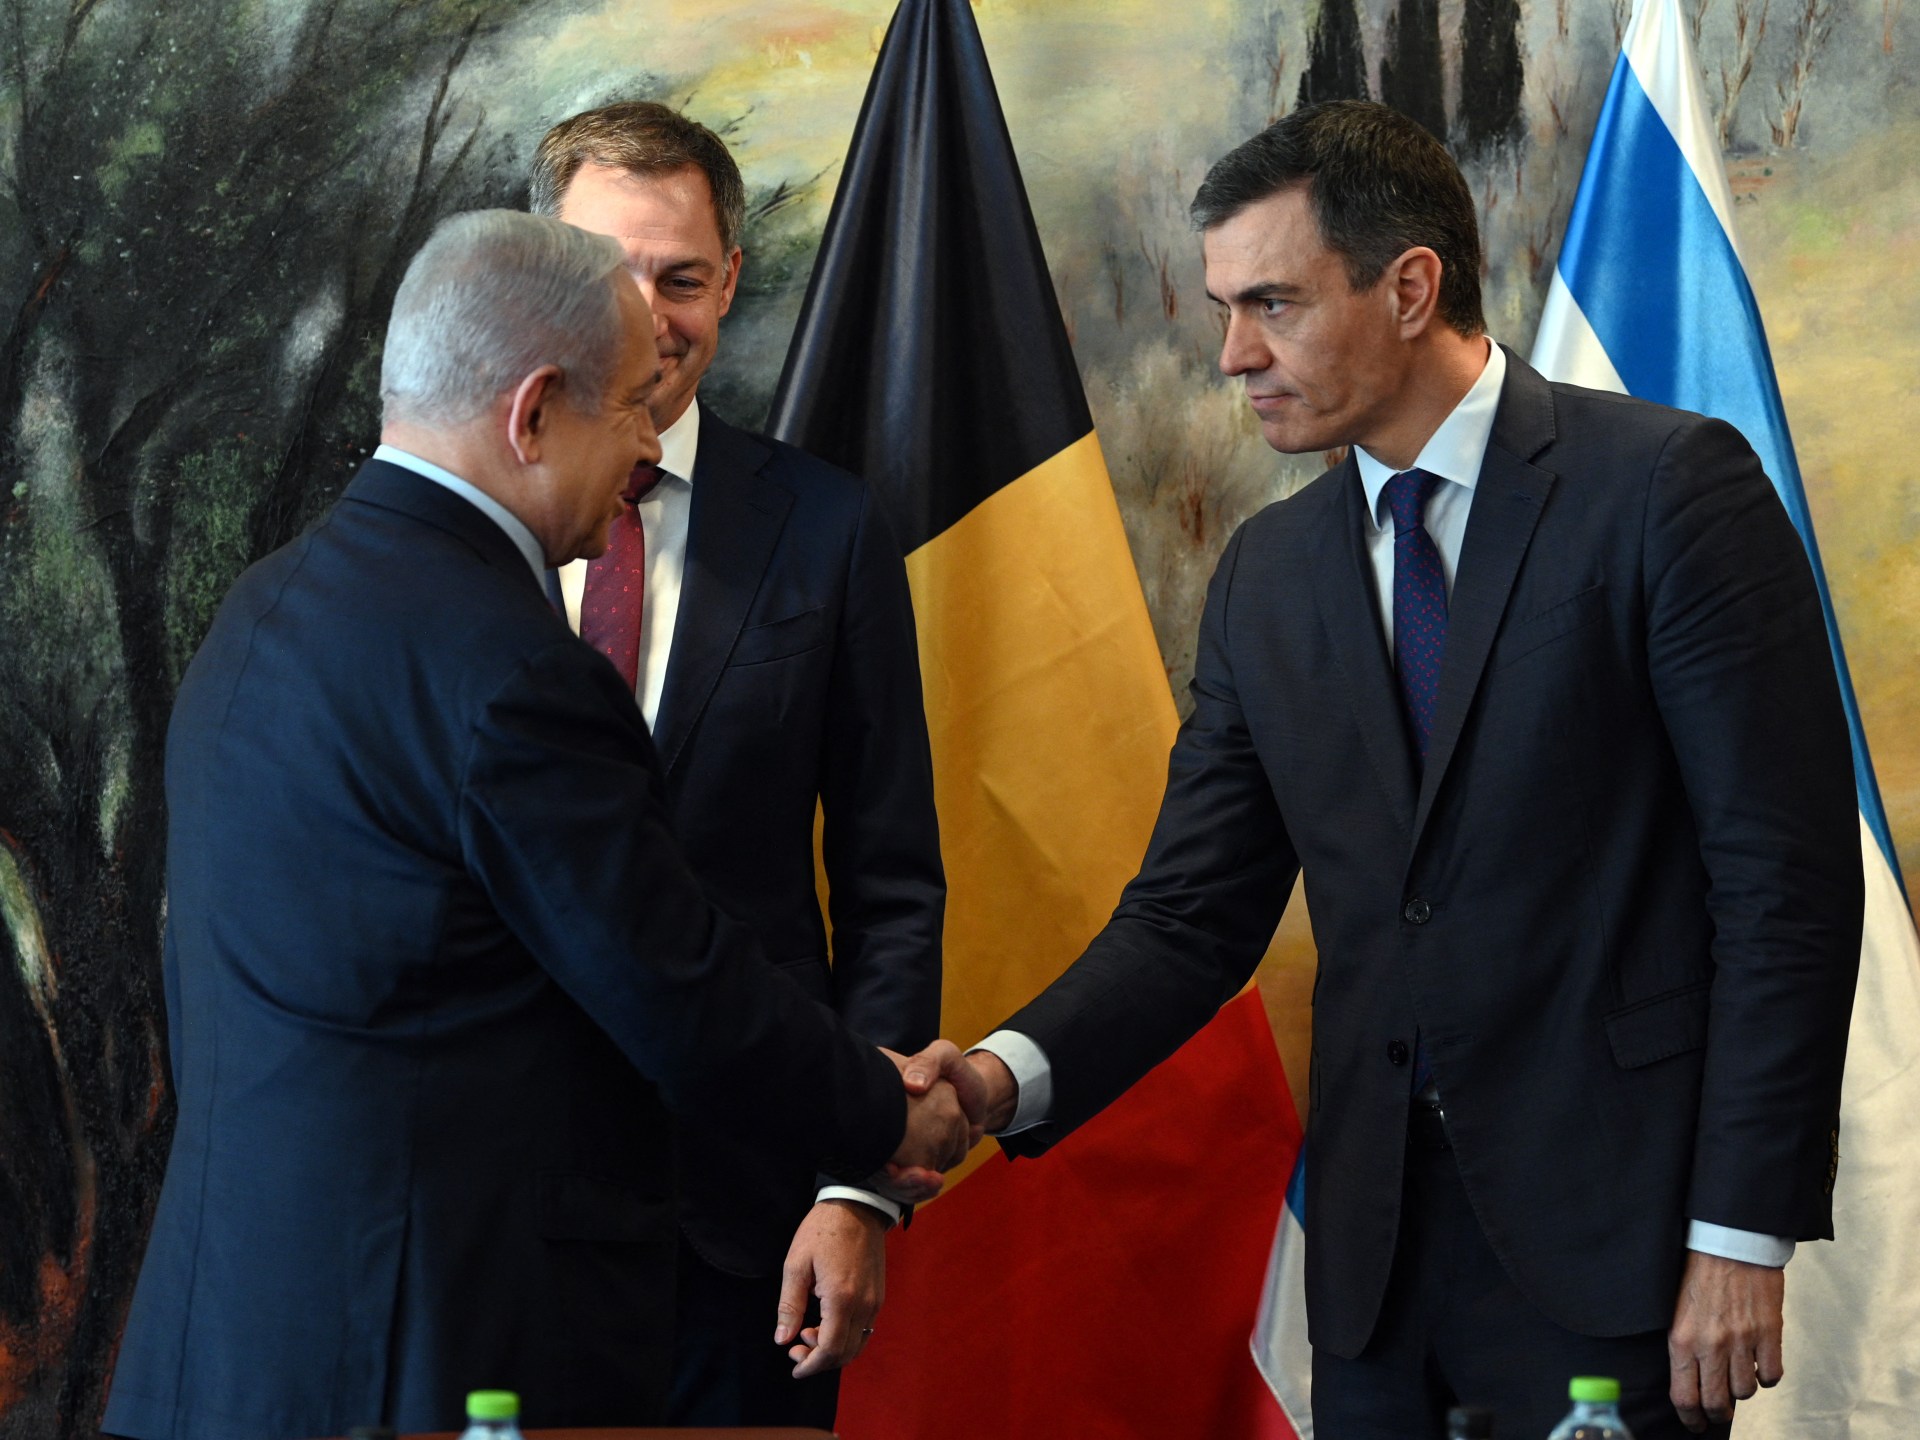 Spanish PM proposes talks on creation of Palestinian state |  News on the Israeli-Palestinian conflict